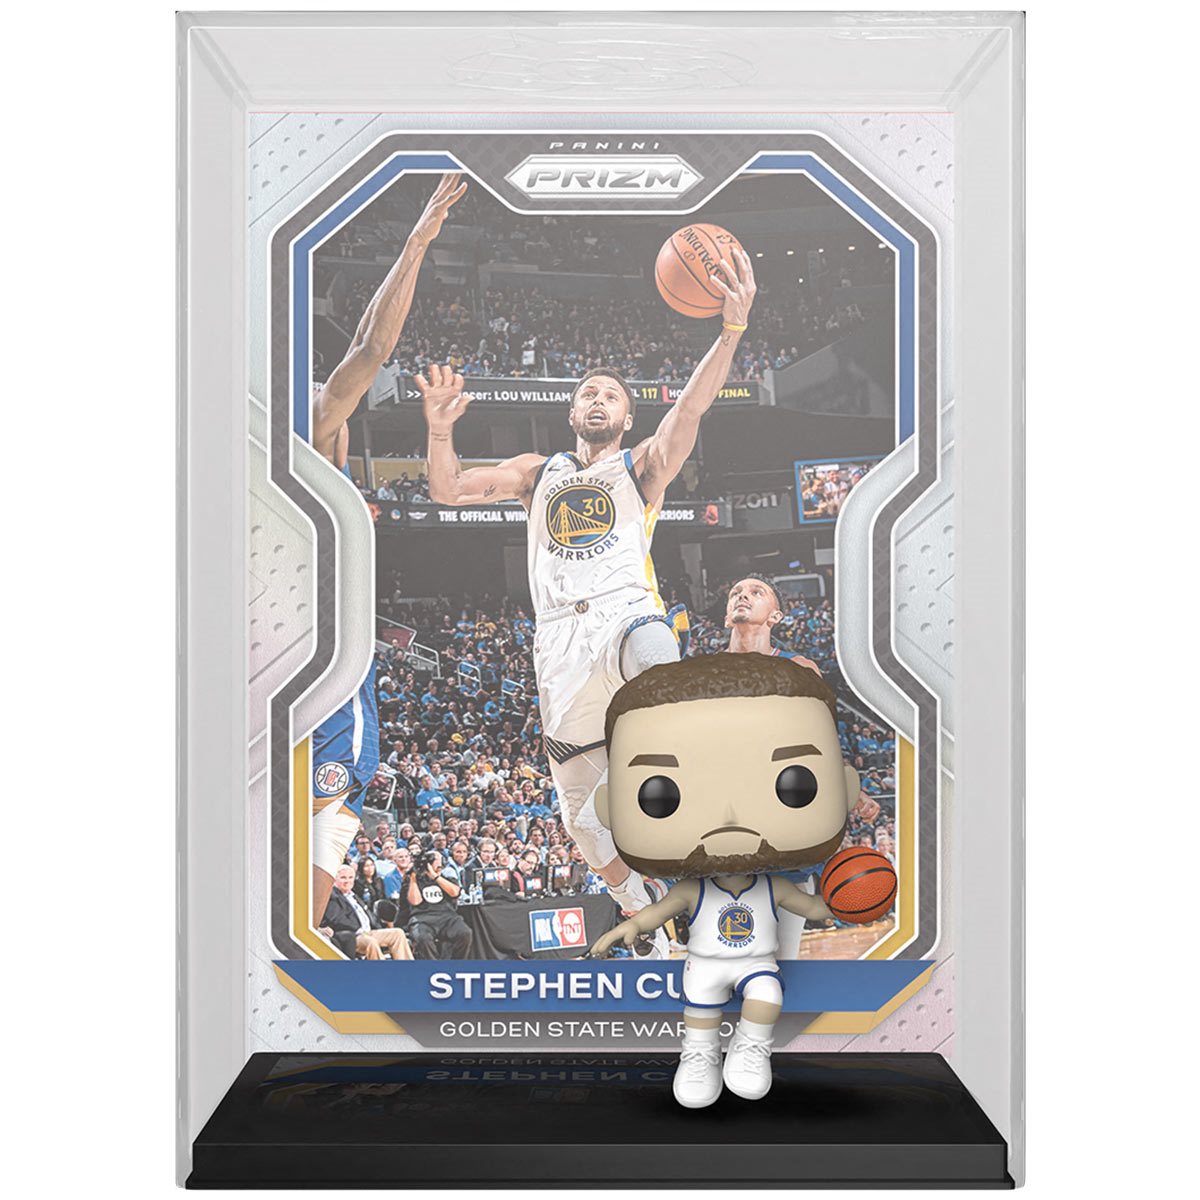 Stephen Curry NBA Funko Pop! Sports Trading Card Figure with Hard Protective Case #04